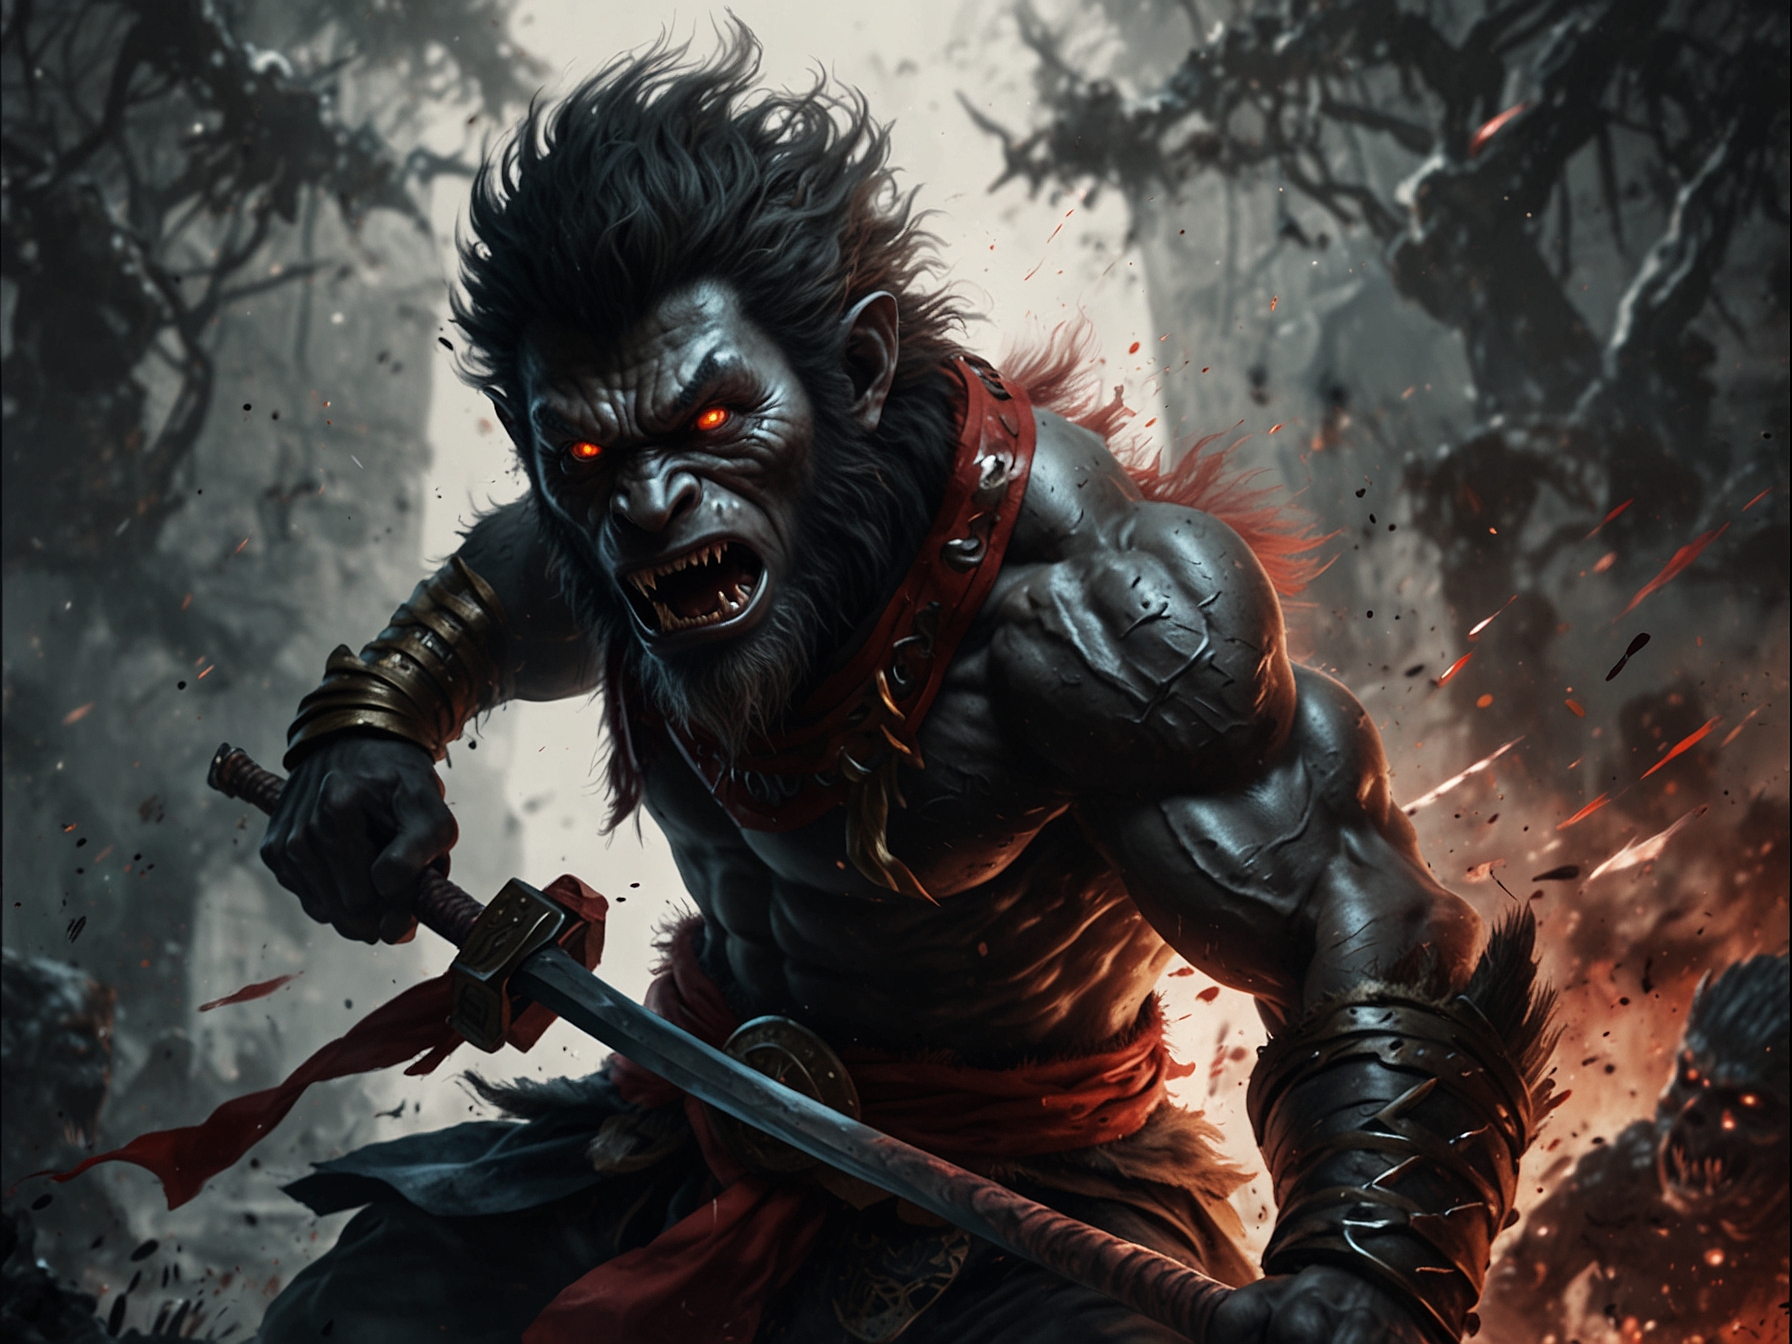 A dynamic scene from Black Myth Wukong showcasing intense combat between the protagonist and a mythical enemy.